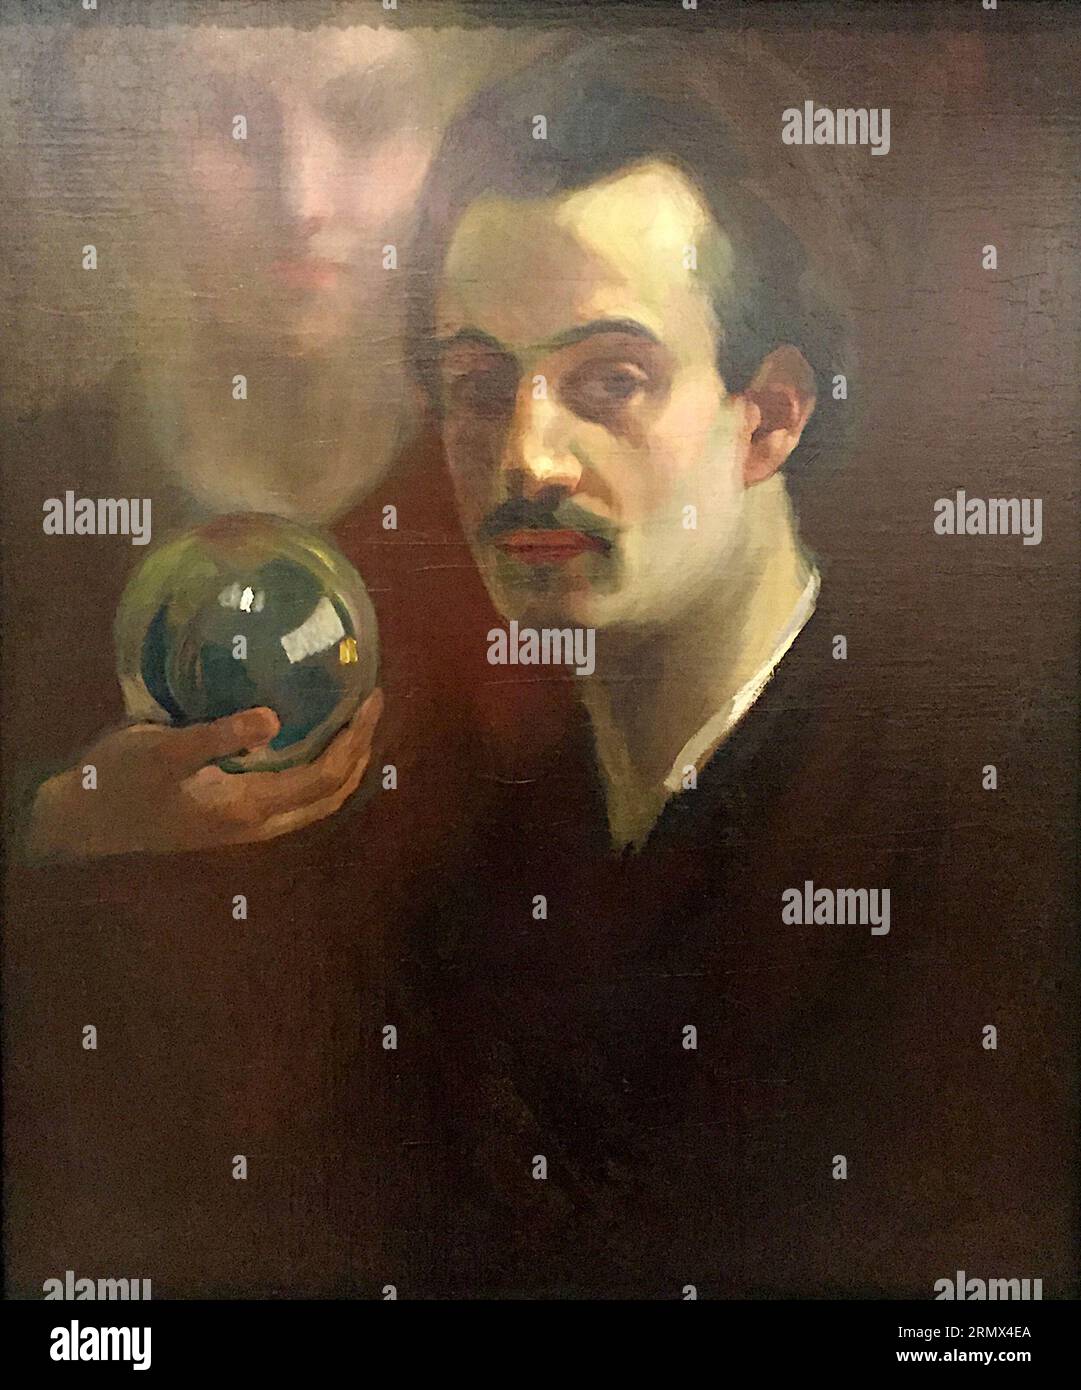 Kahlil Gibran - Lebanese-American writer - Self Portrait with Muse ...